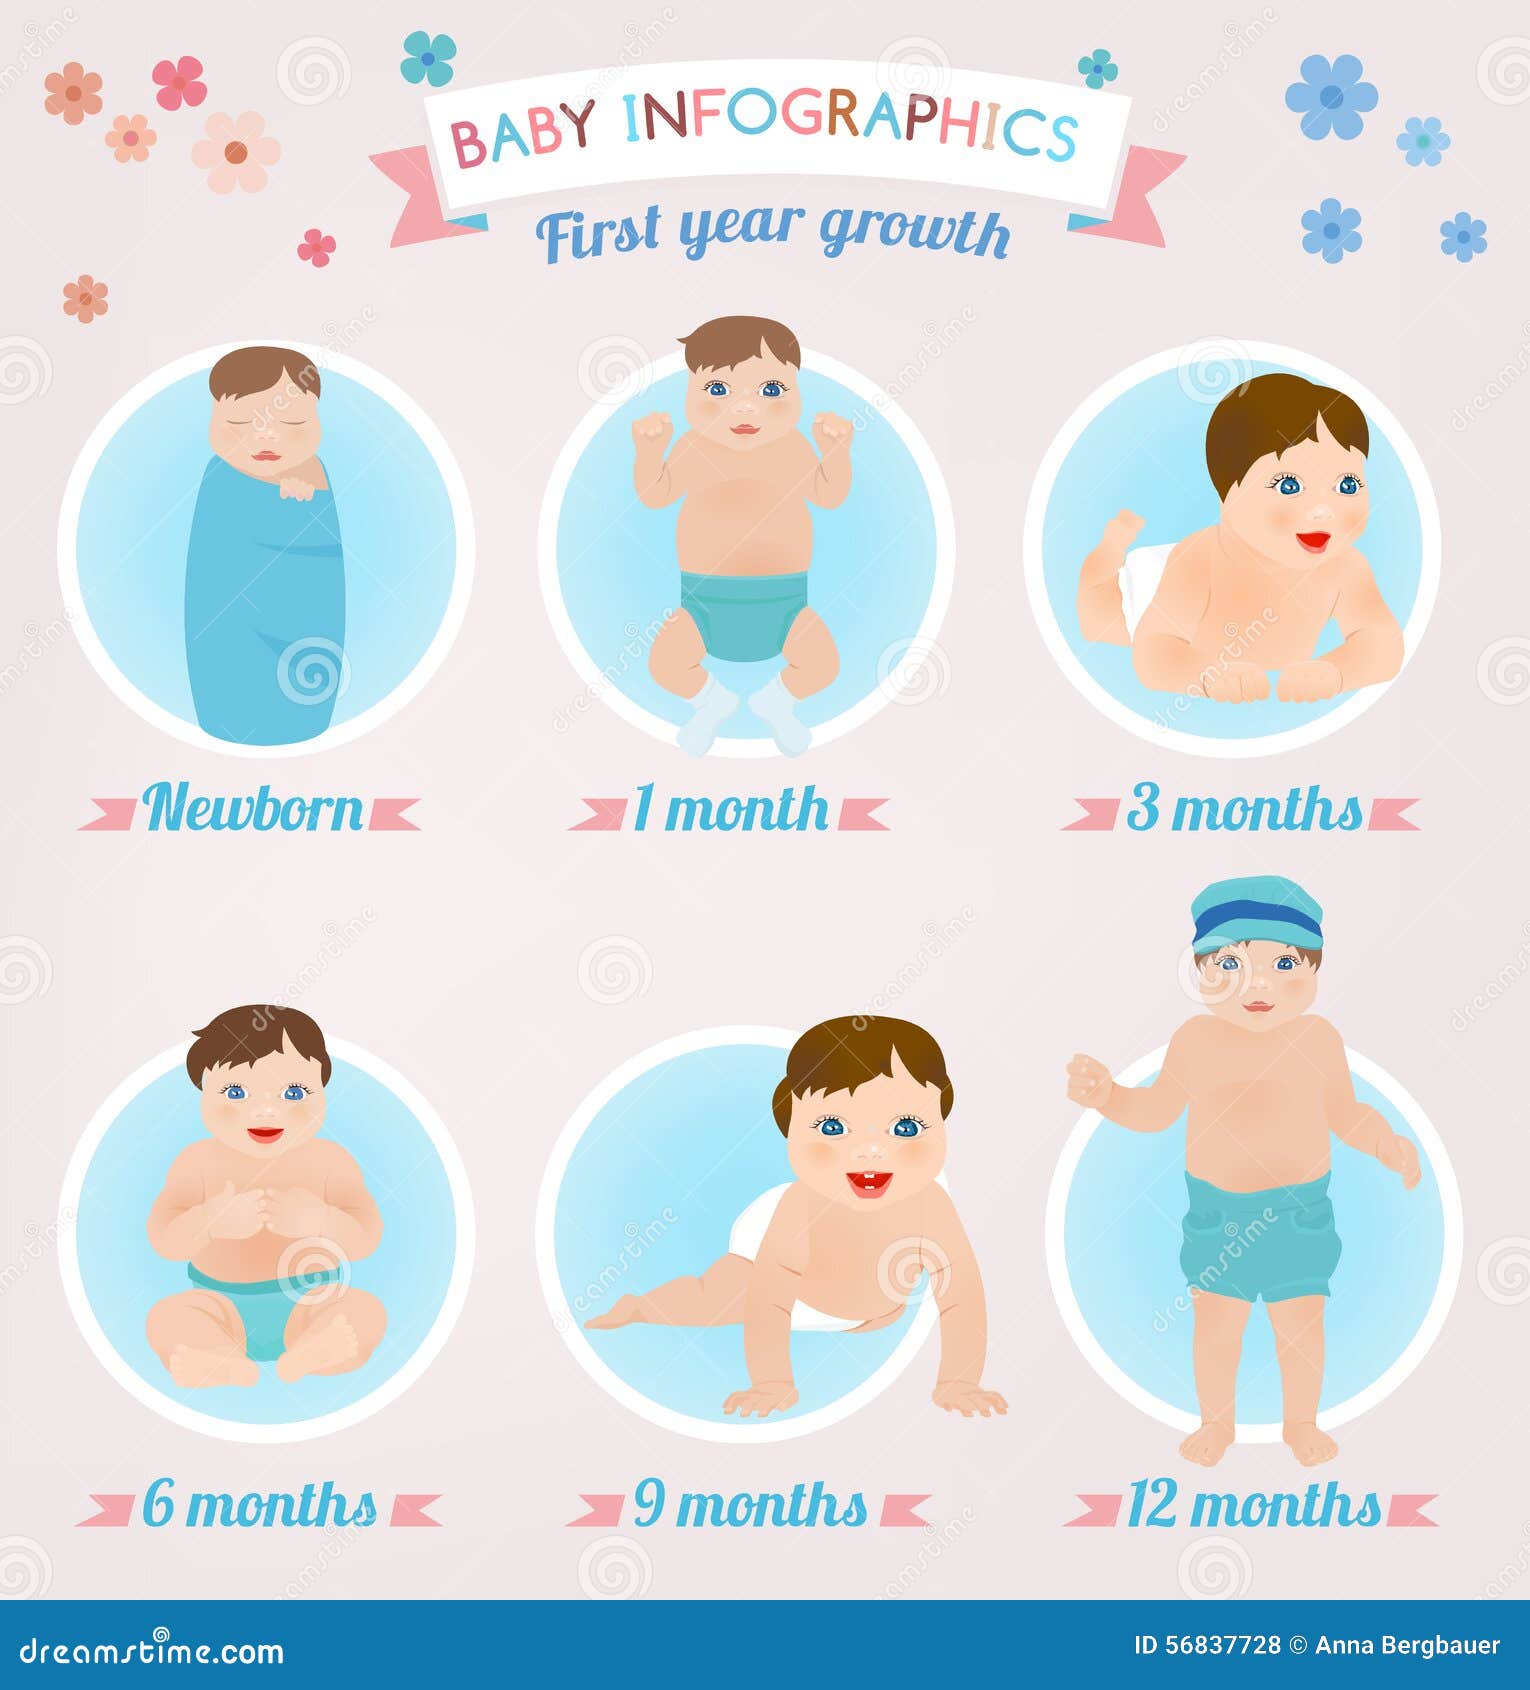 Baby Infographic Stock Vector - Image: 56837728